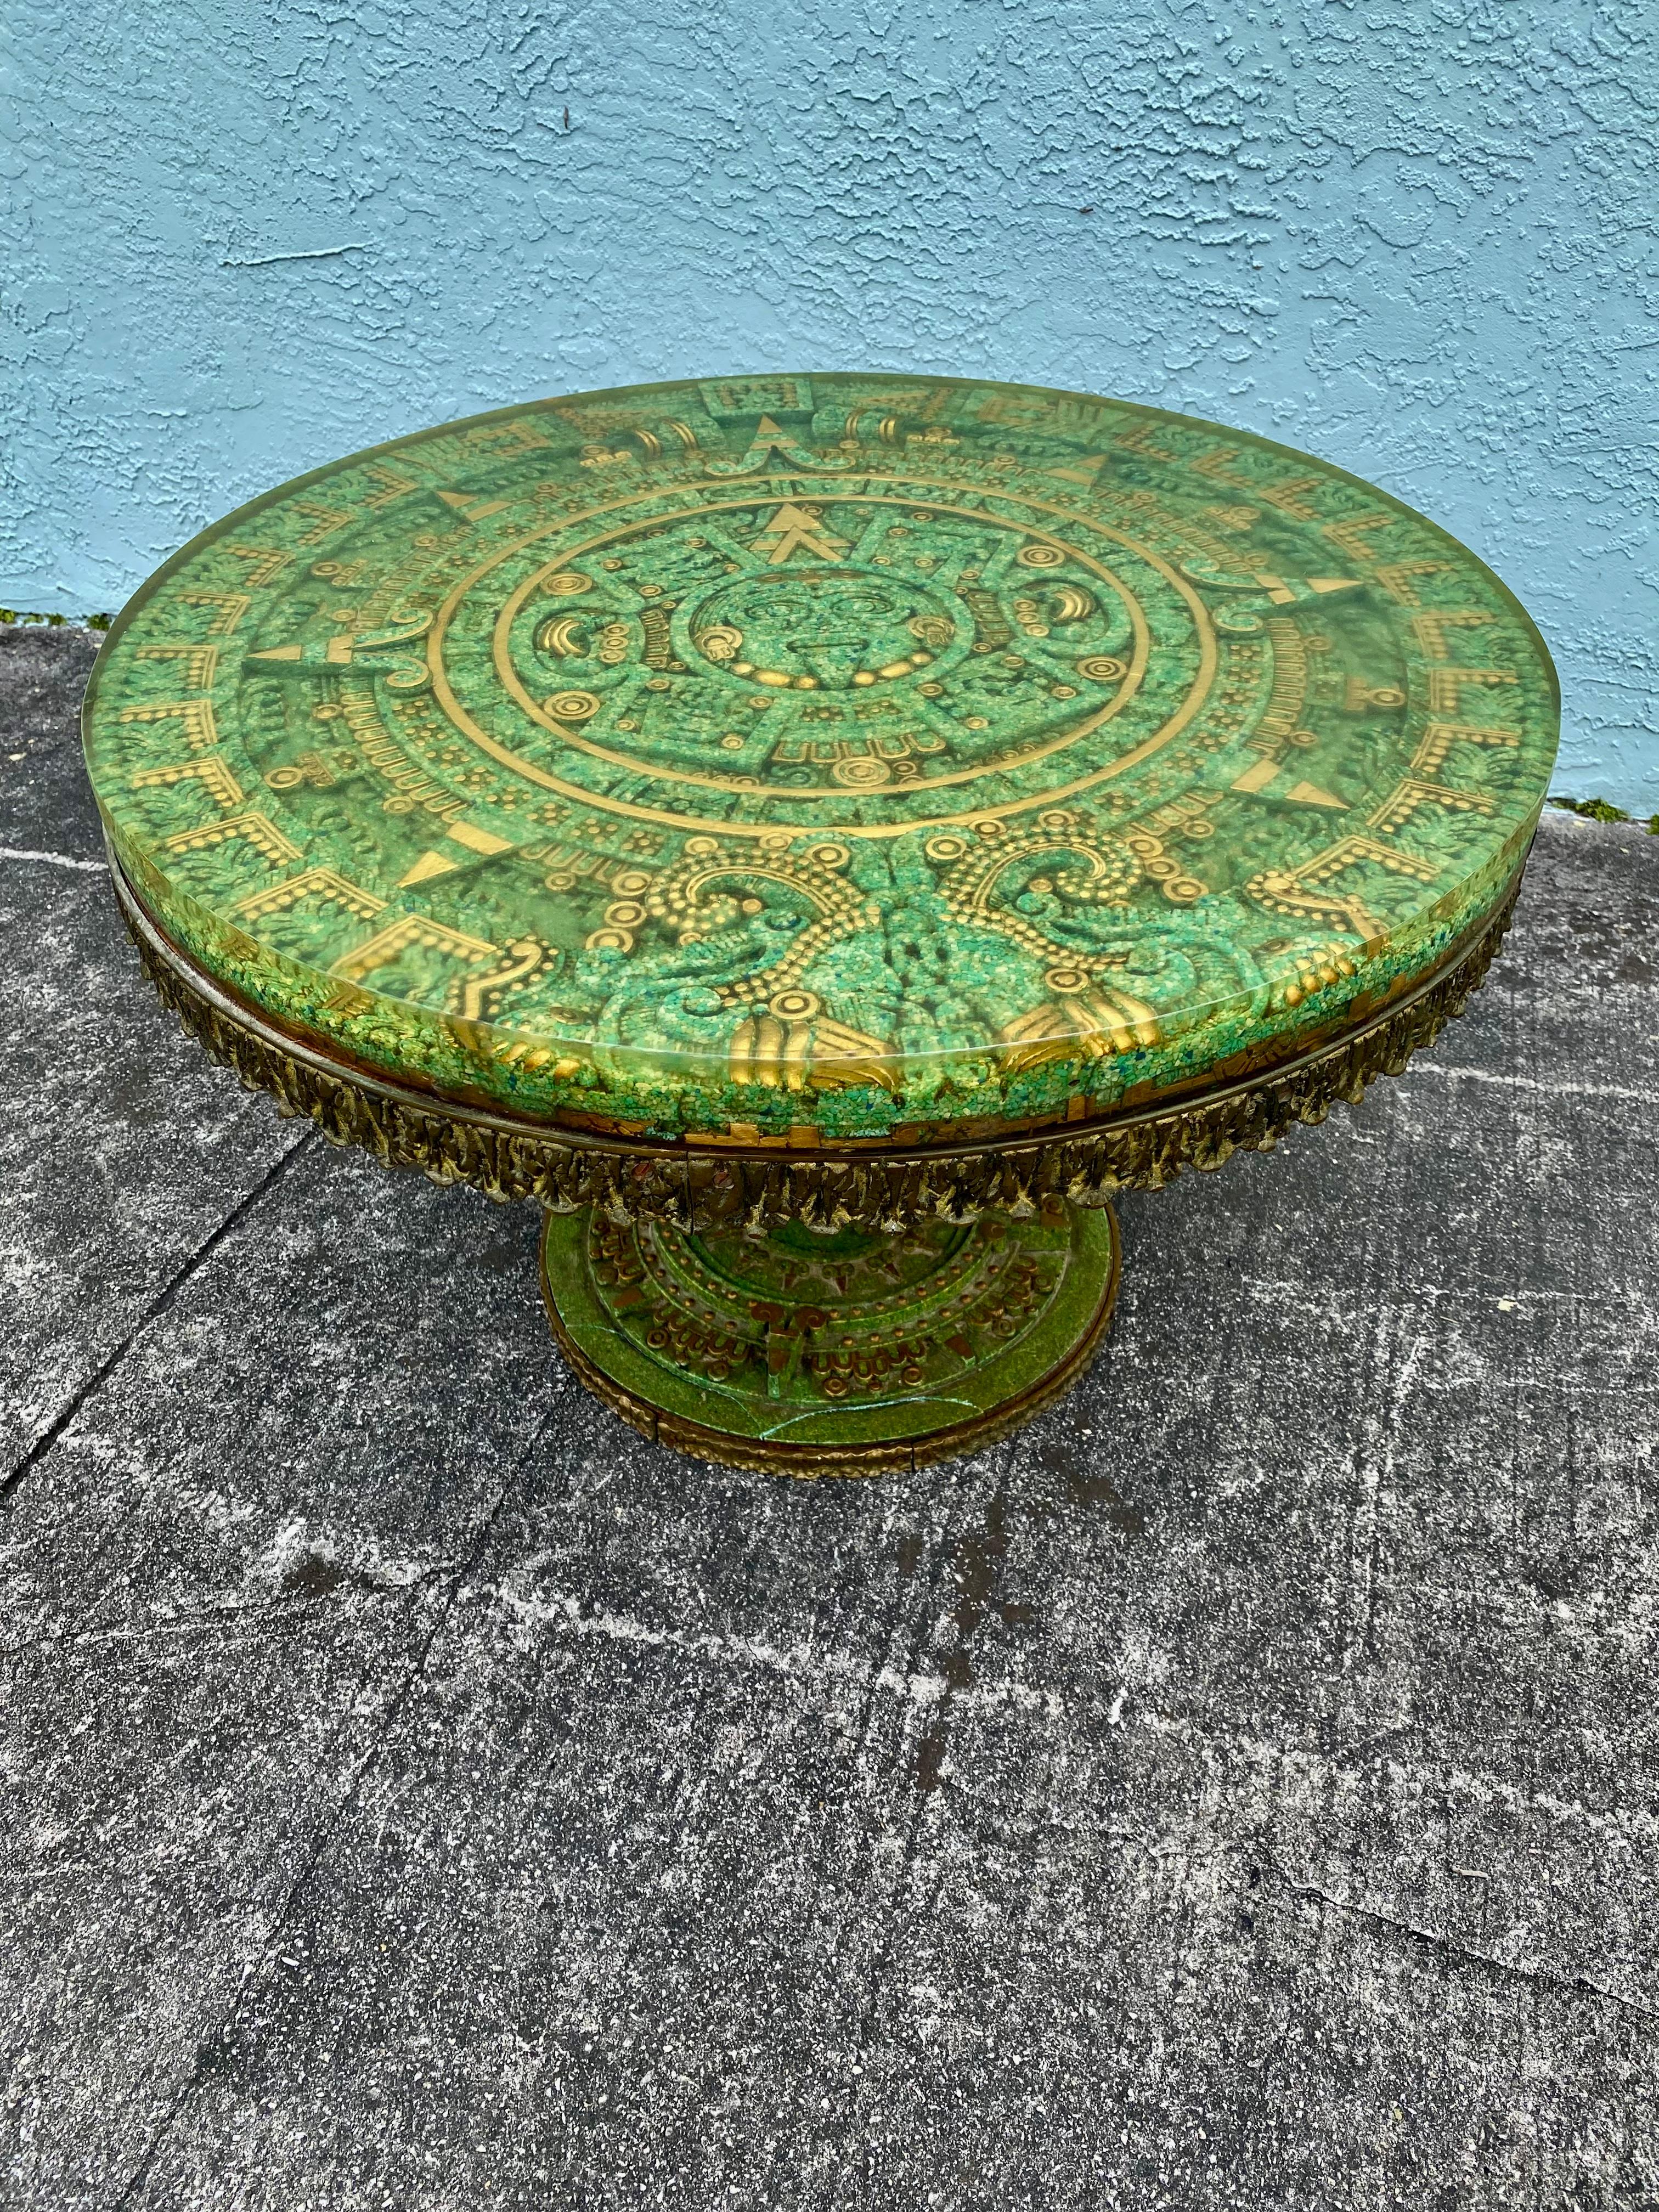 Sculpted Inlay Malachite Brutalist Bronze Wood Stone Resin Aztec Circular Table  For Sale 19